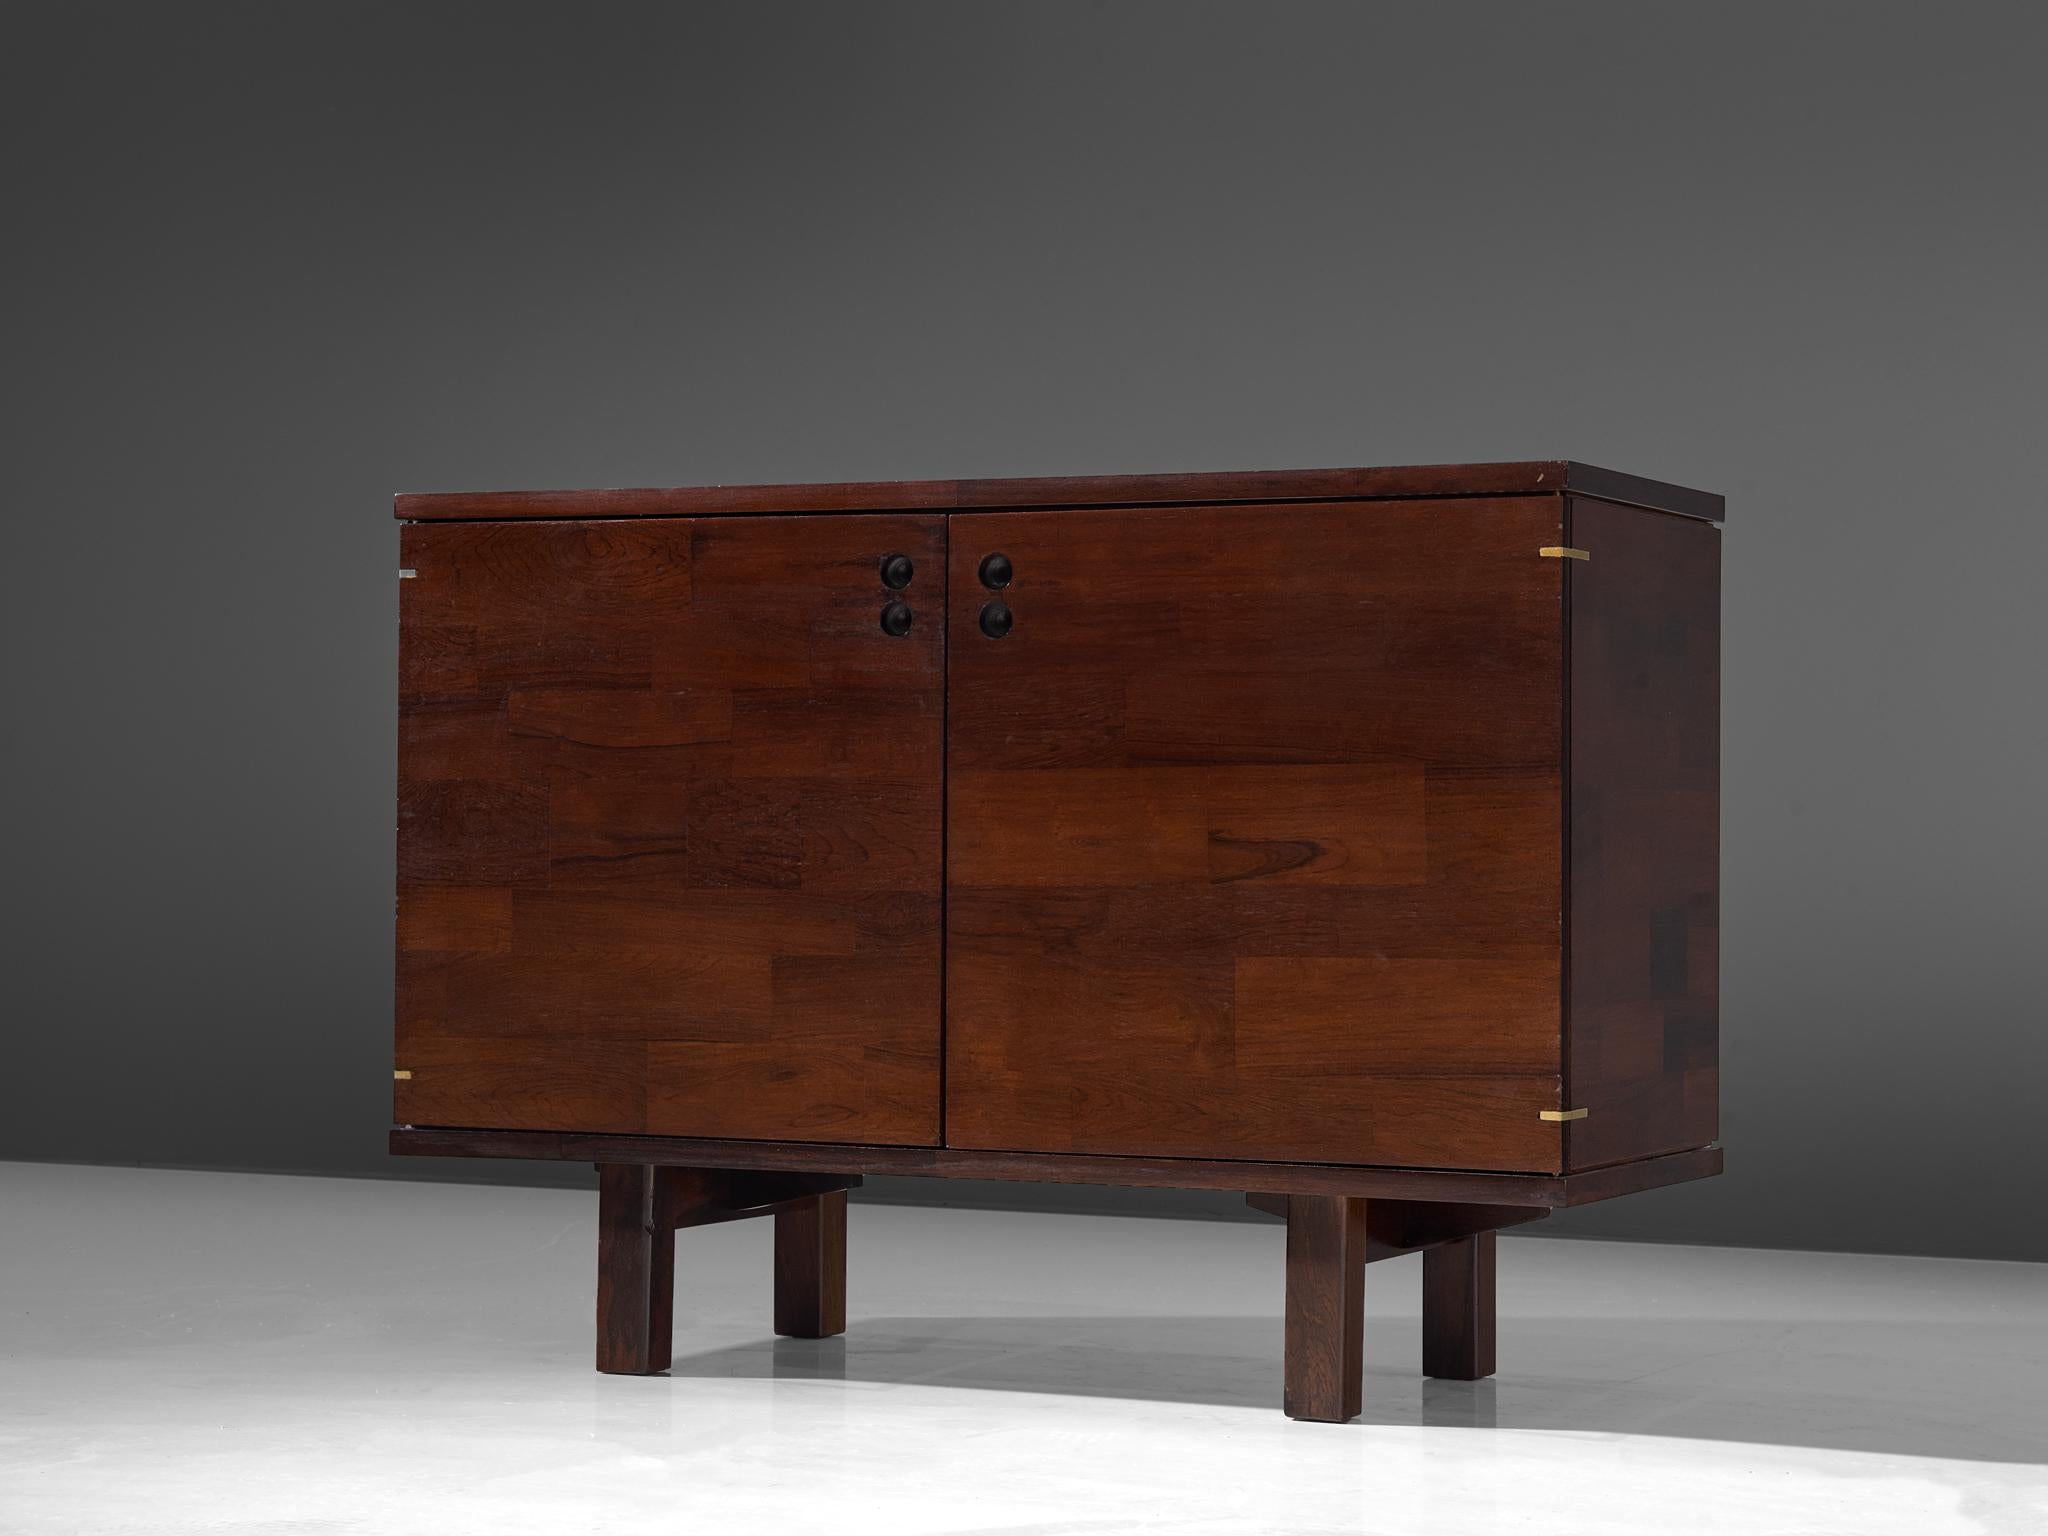 Jorge Zalszupin for L'Atelier, sideboard, rosewood and brass, Brazil, 1960s.

This cabinet is designed by Jorge Zalszupin for L'Atelier. Highly detailed inlaid rosewood veneer pieces which create this unique and exceptional expression. The steel